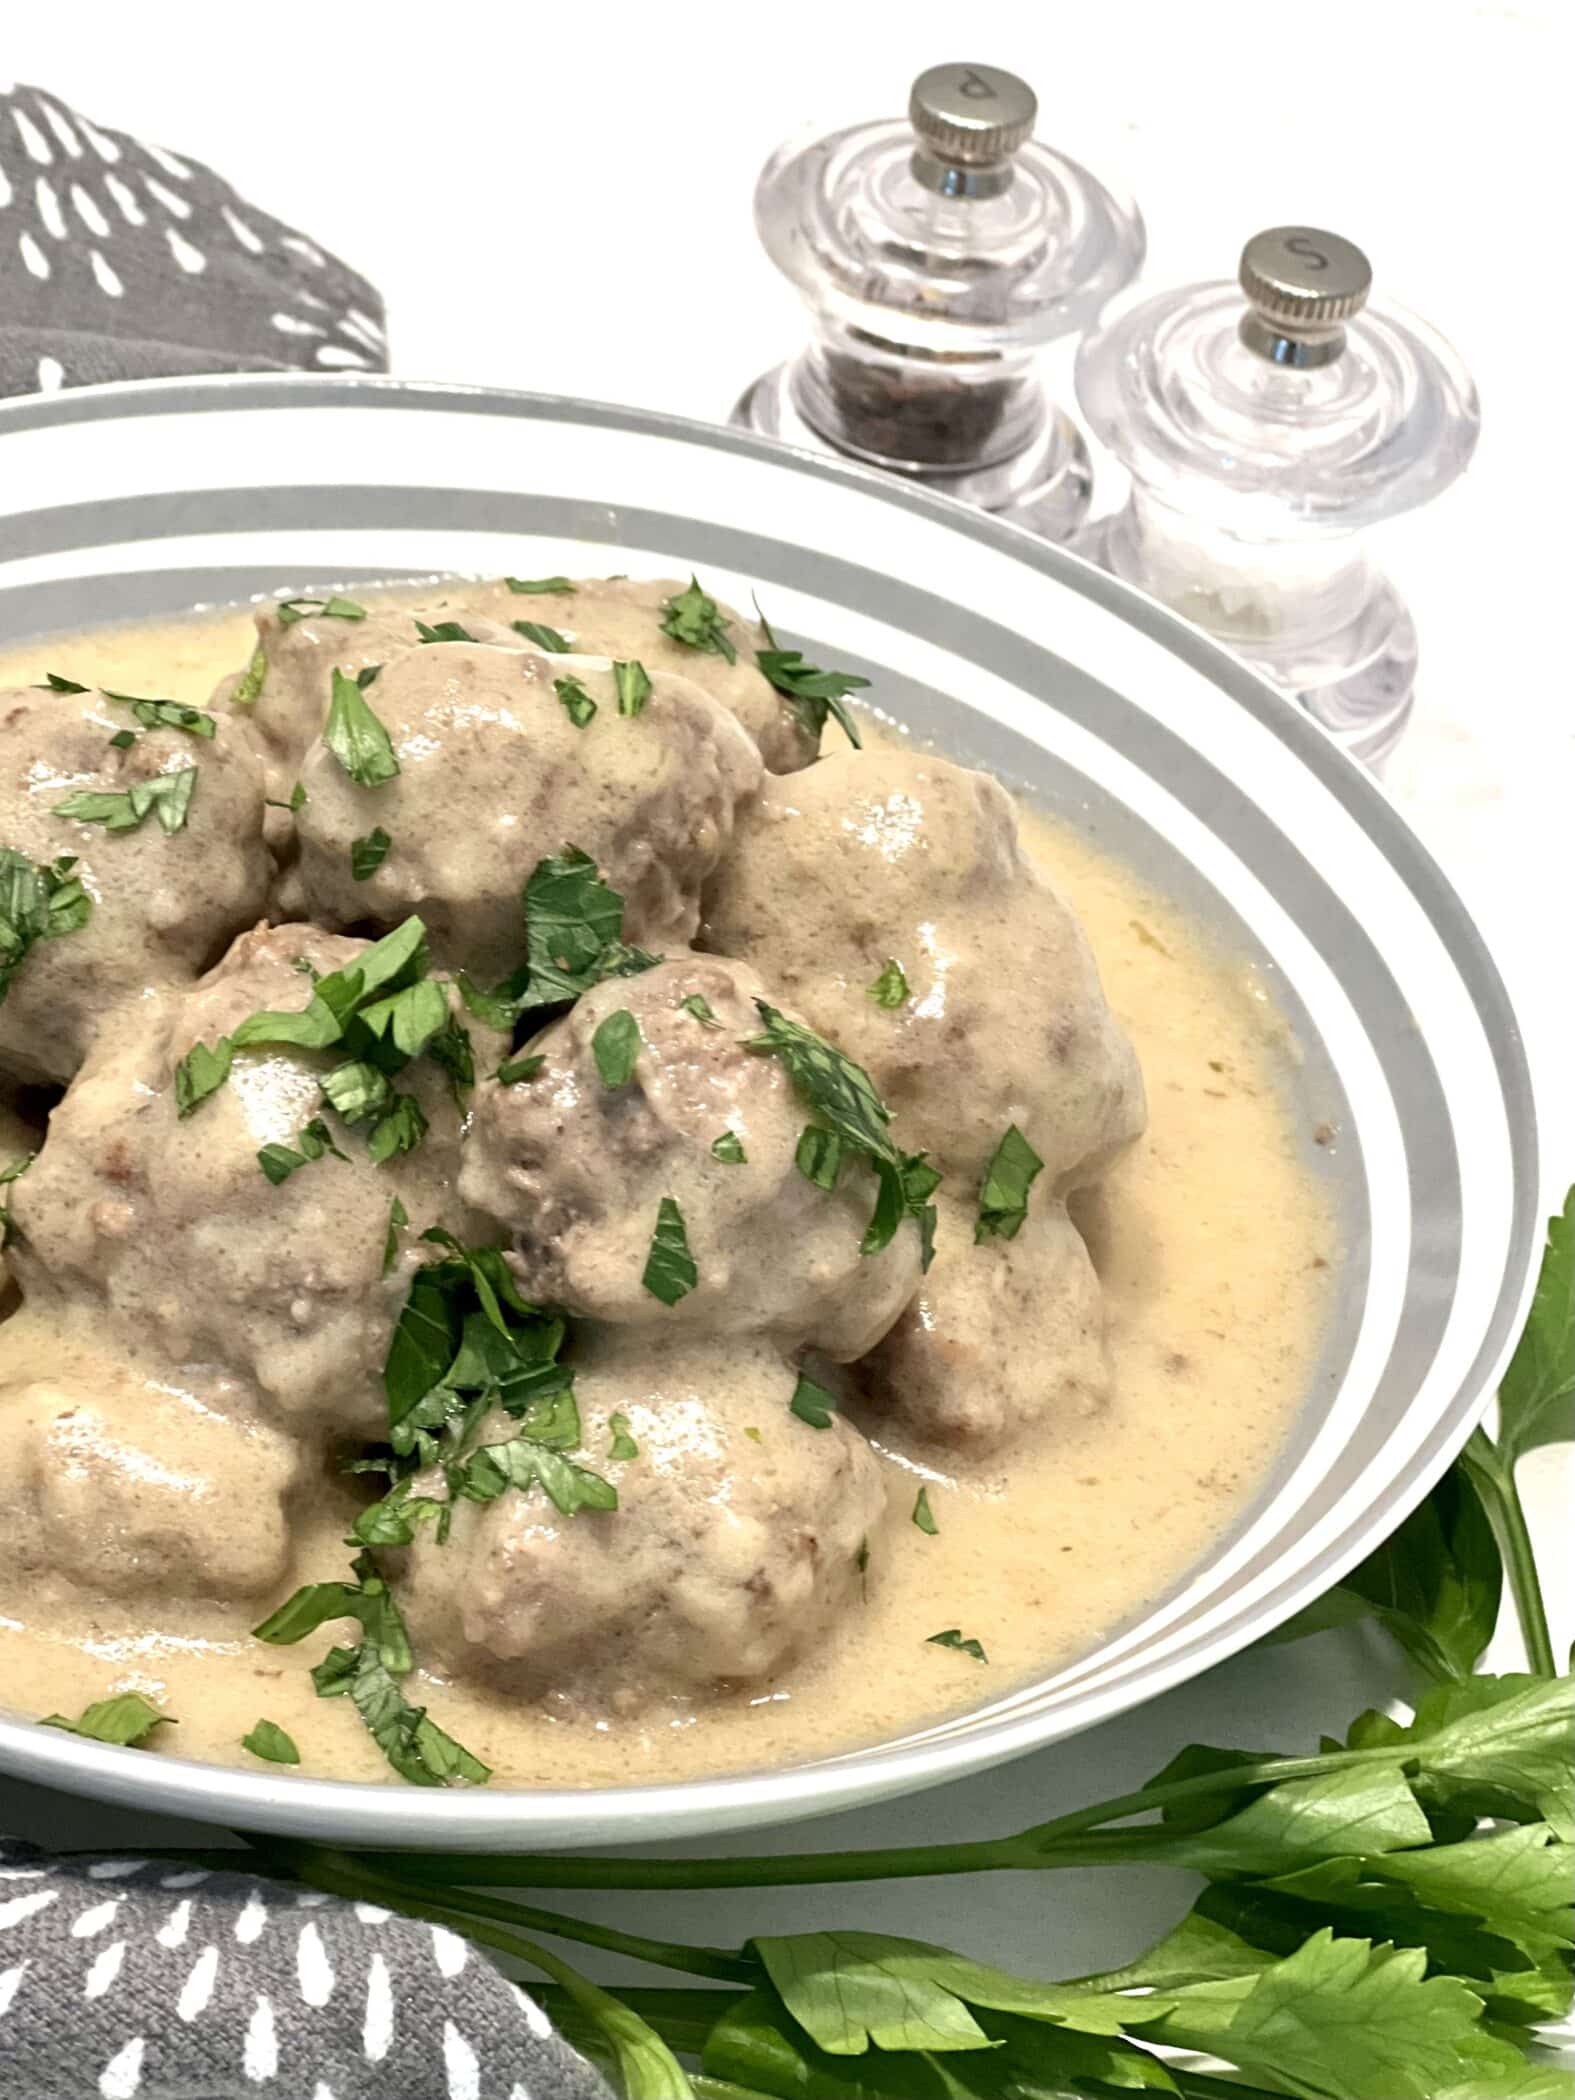 swedish meatballs and sauce in a serving dish